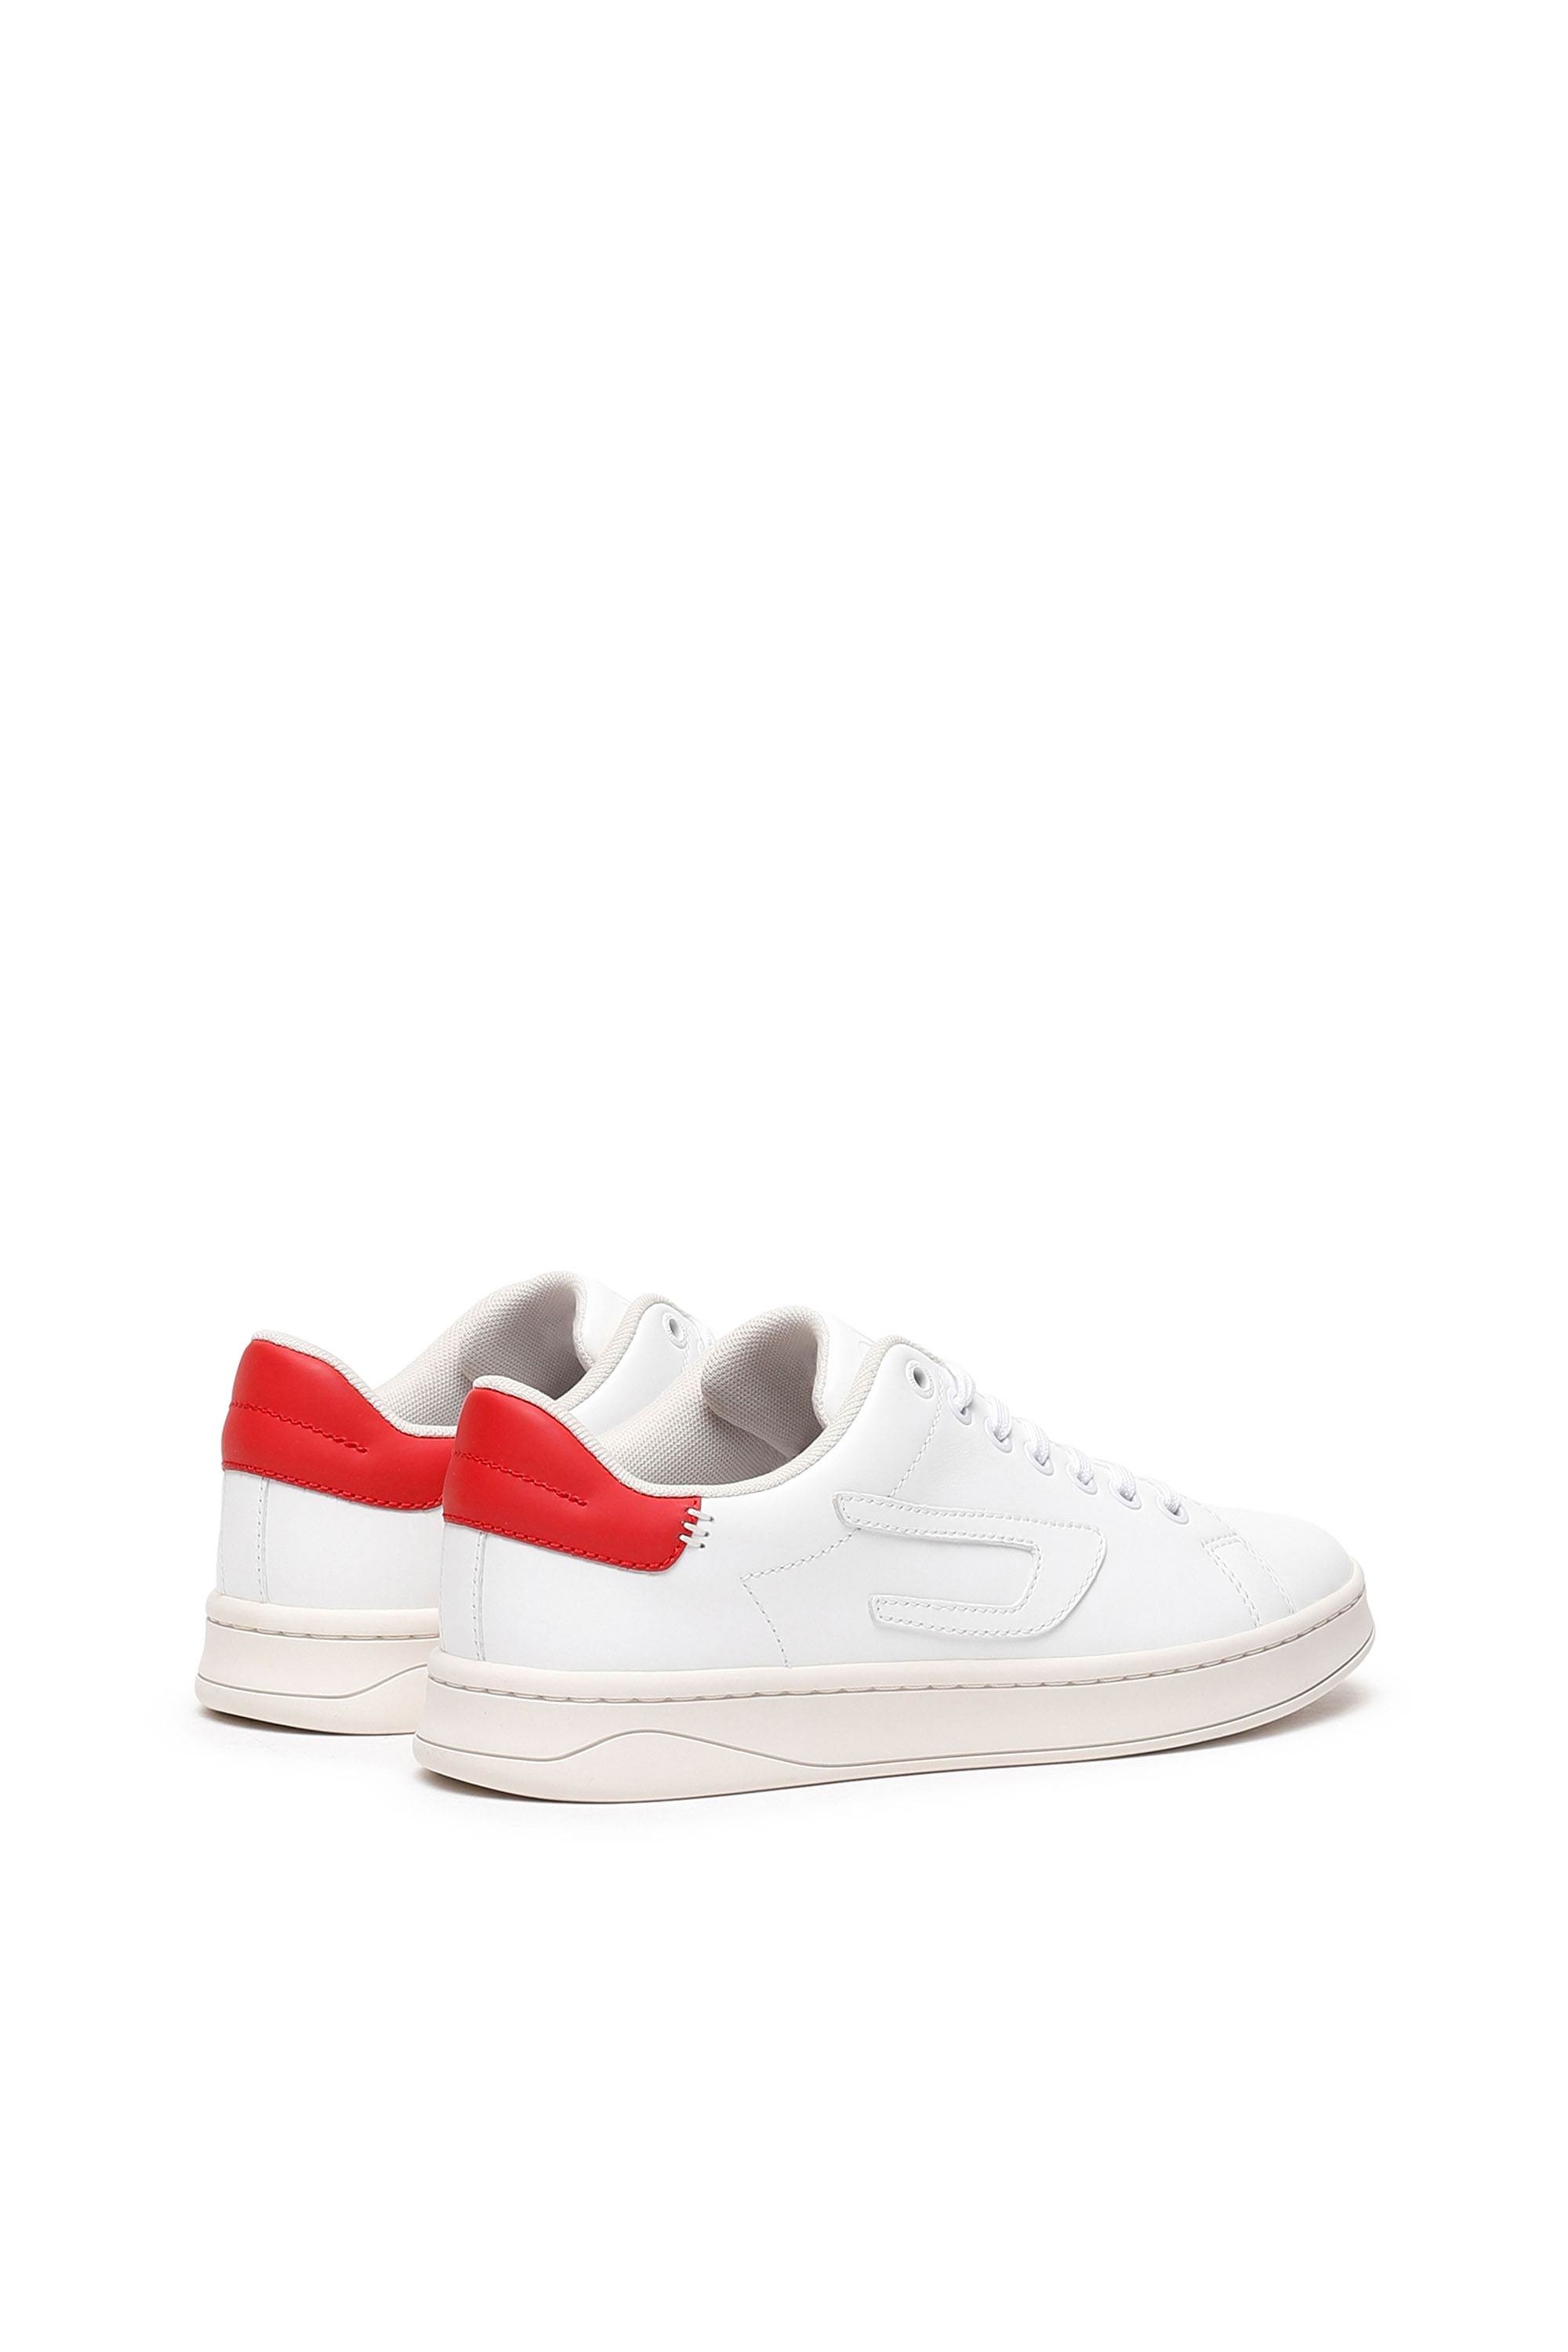 Diesel - S-ATHENE LOW W, Weiss/Rot - Image 3